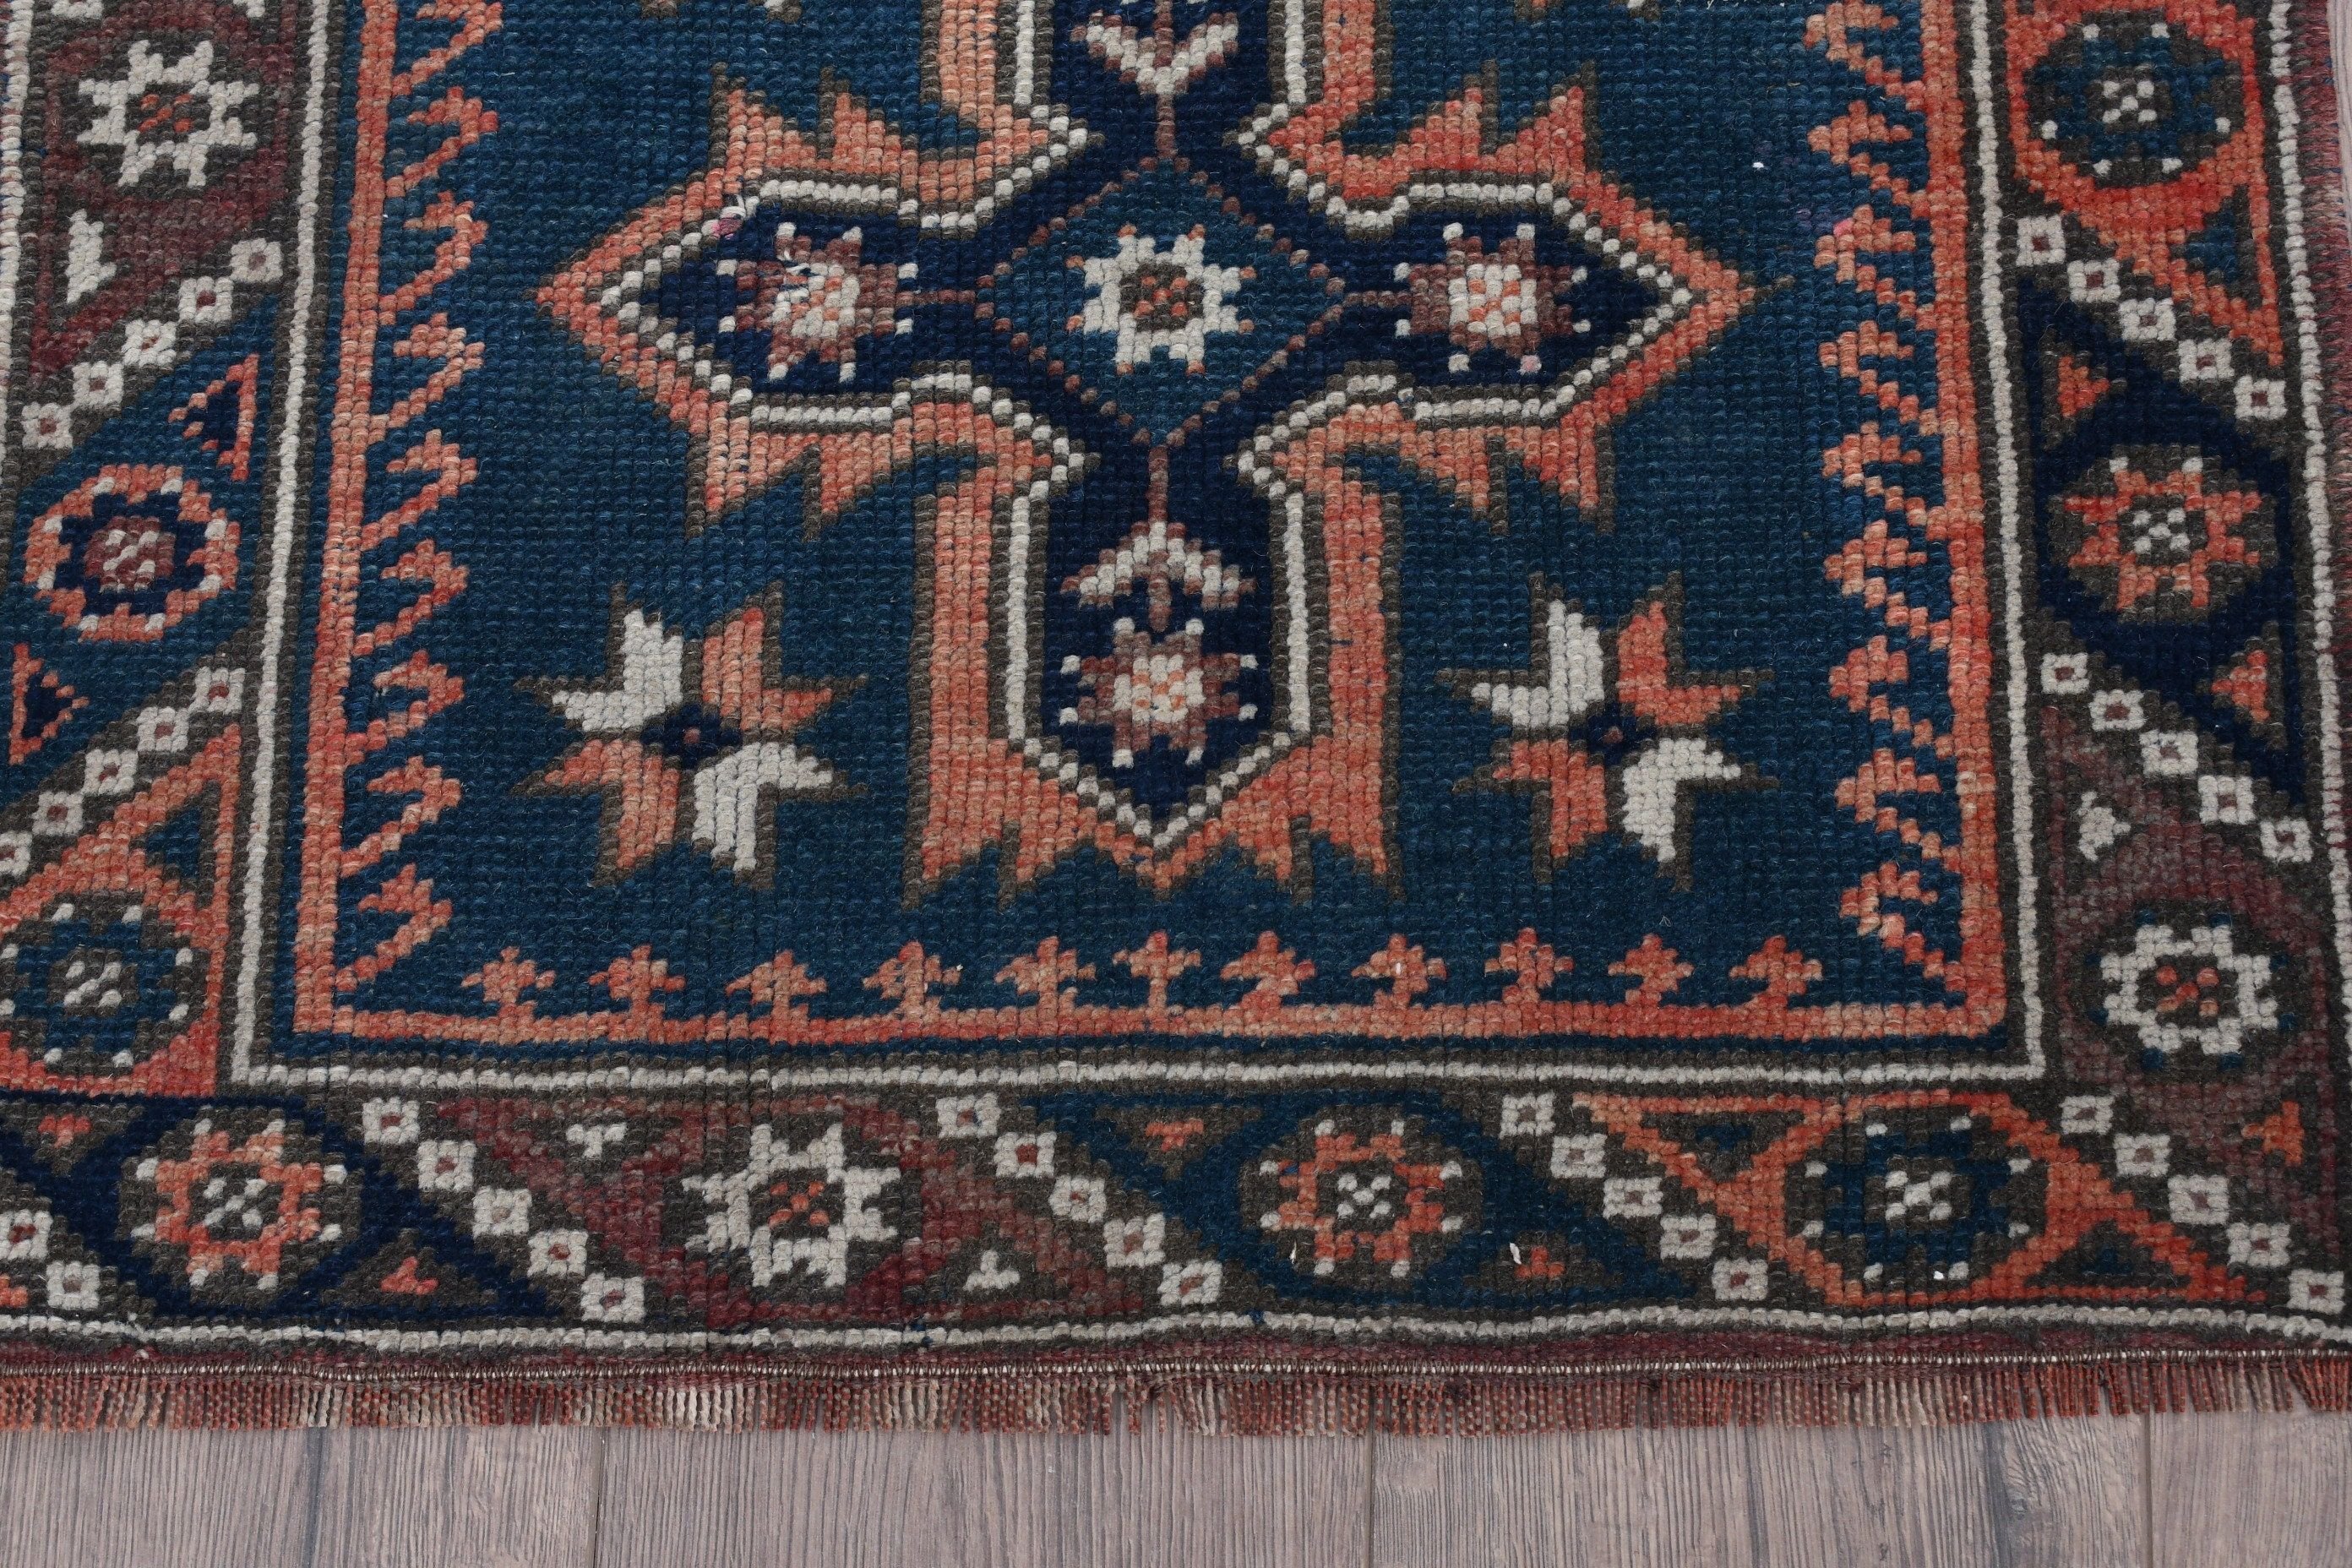 Entry Rug, 2.1x1.9 ft Small Rugs, Blue Kitchen Rug, Moroccan Rug, Oushak Rug, Vintage Rugs, Turkish Rugs, Nursery Rugs, Rugs for Bathroom